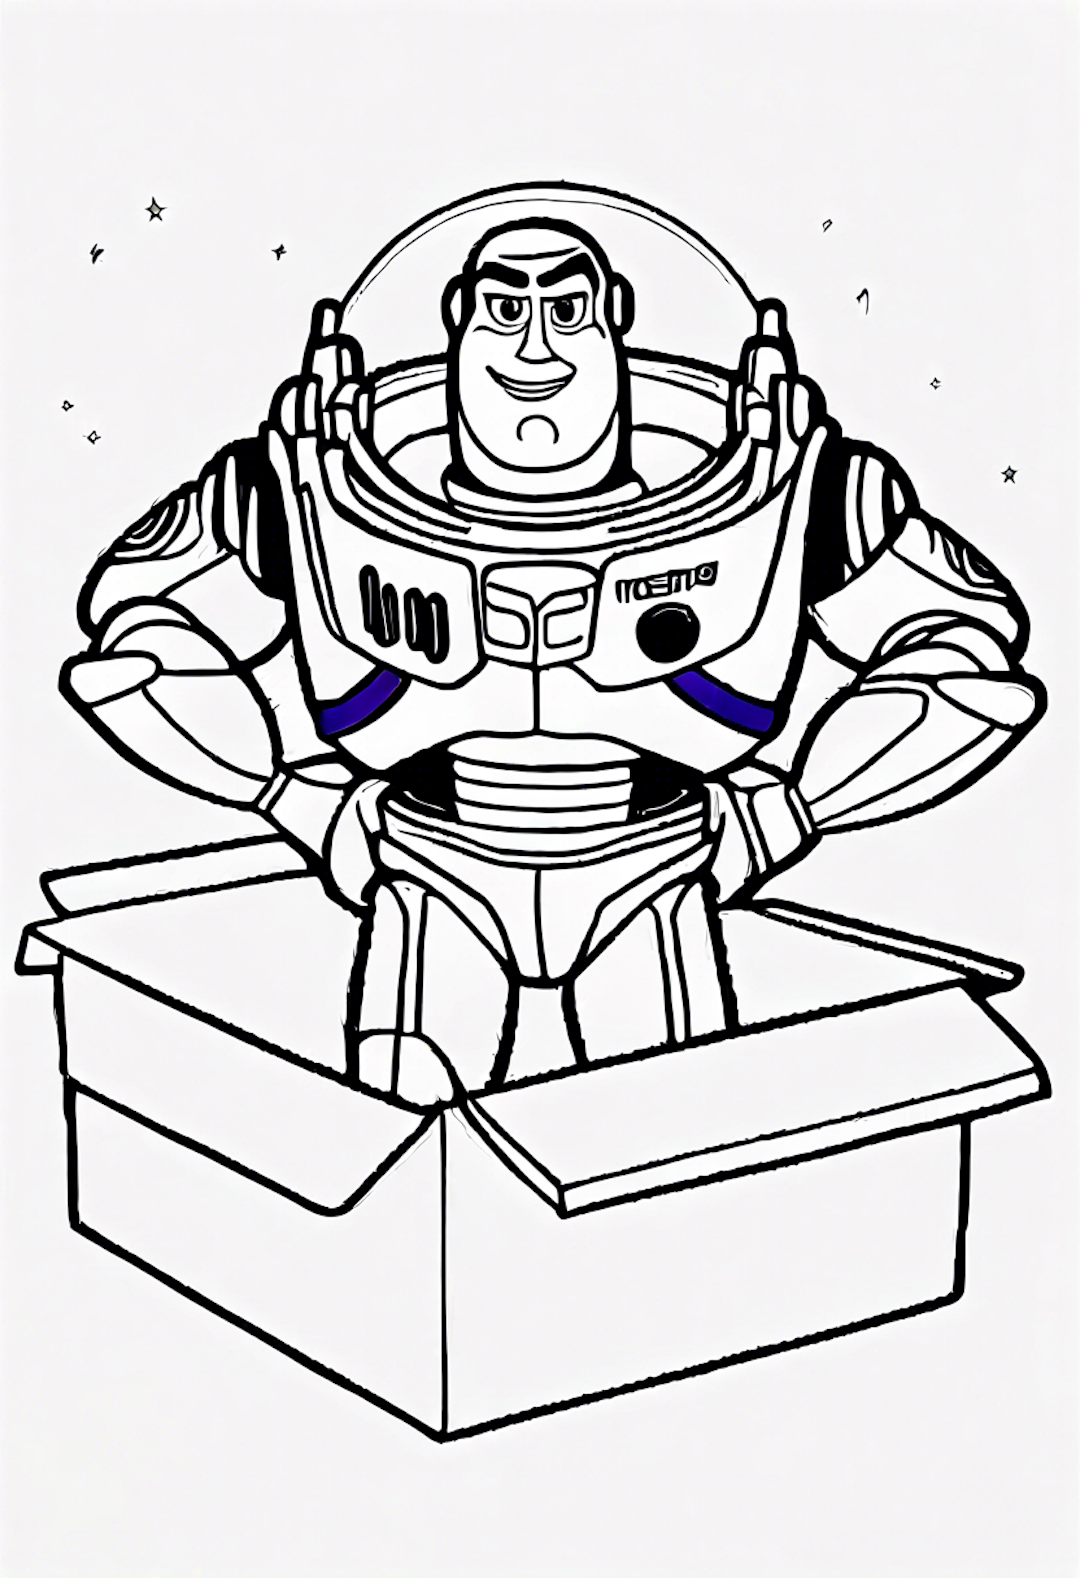 Buzz Lightyear Lying In A Box Of Toys